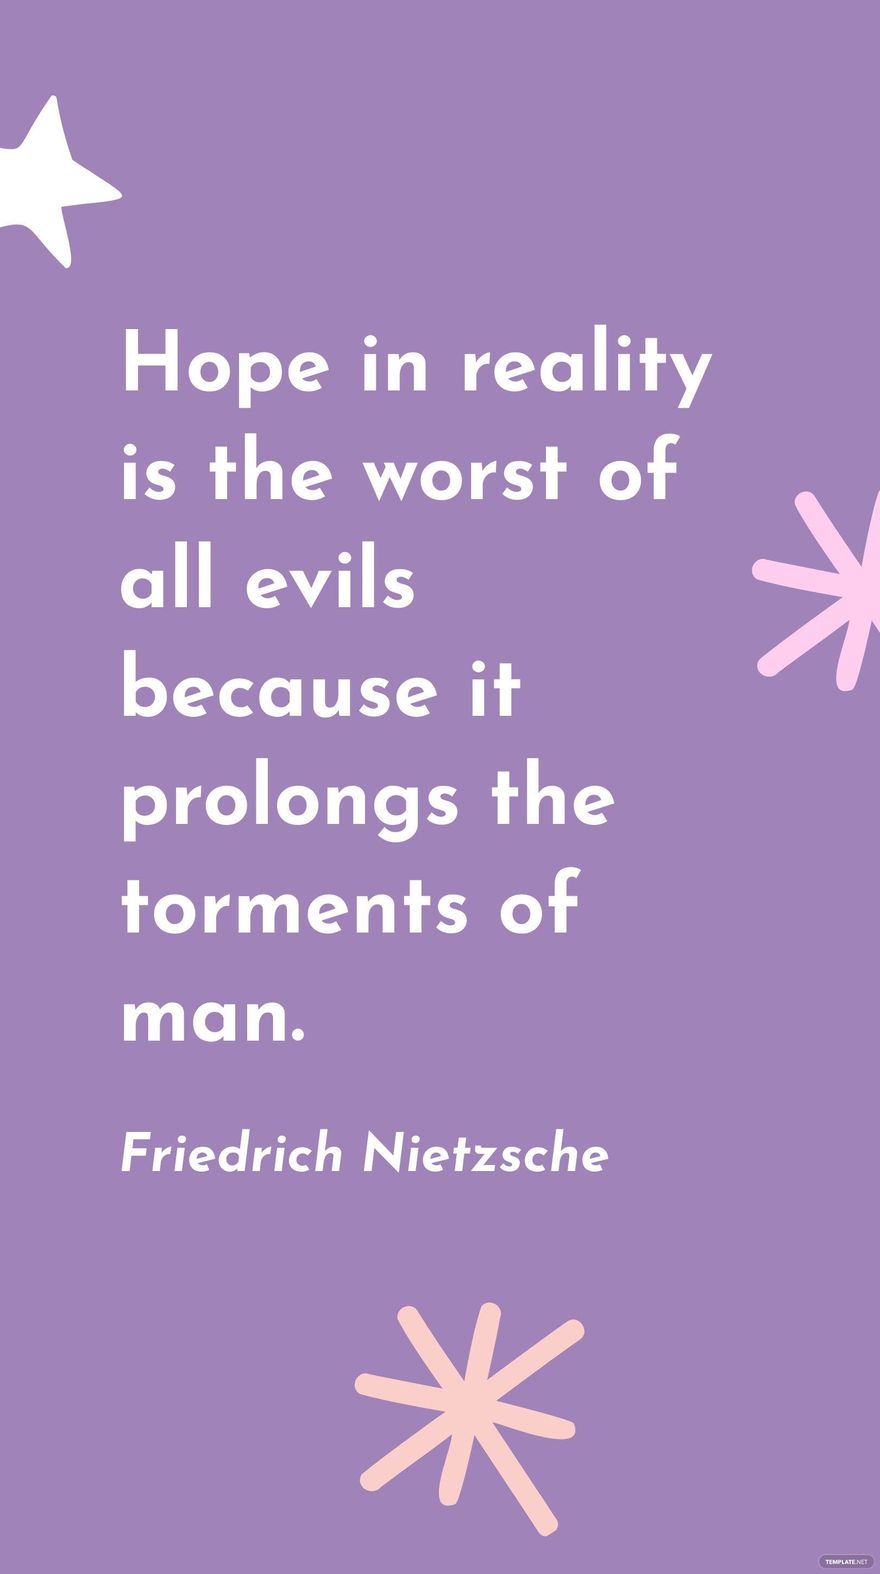 Friedrich Nietzsche - Hope in reality is the worst of all evils because it prolongs the torments of man.